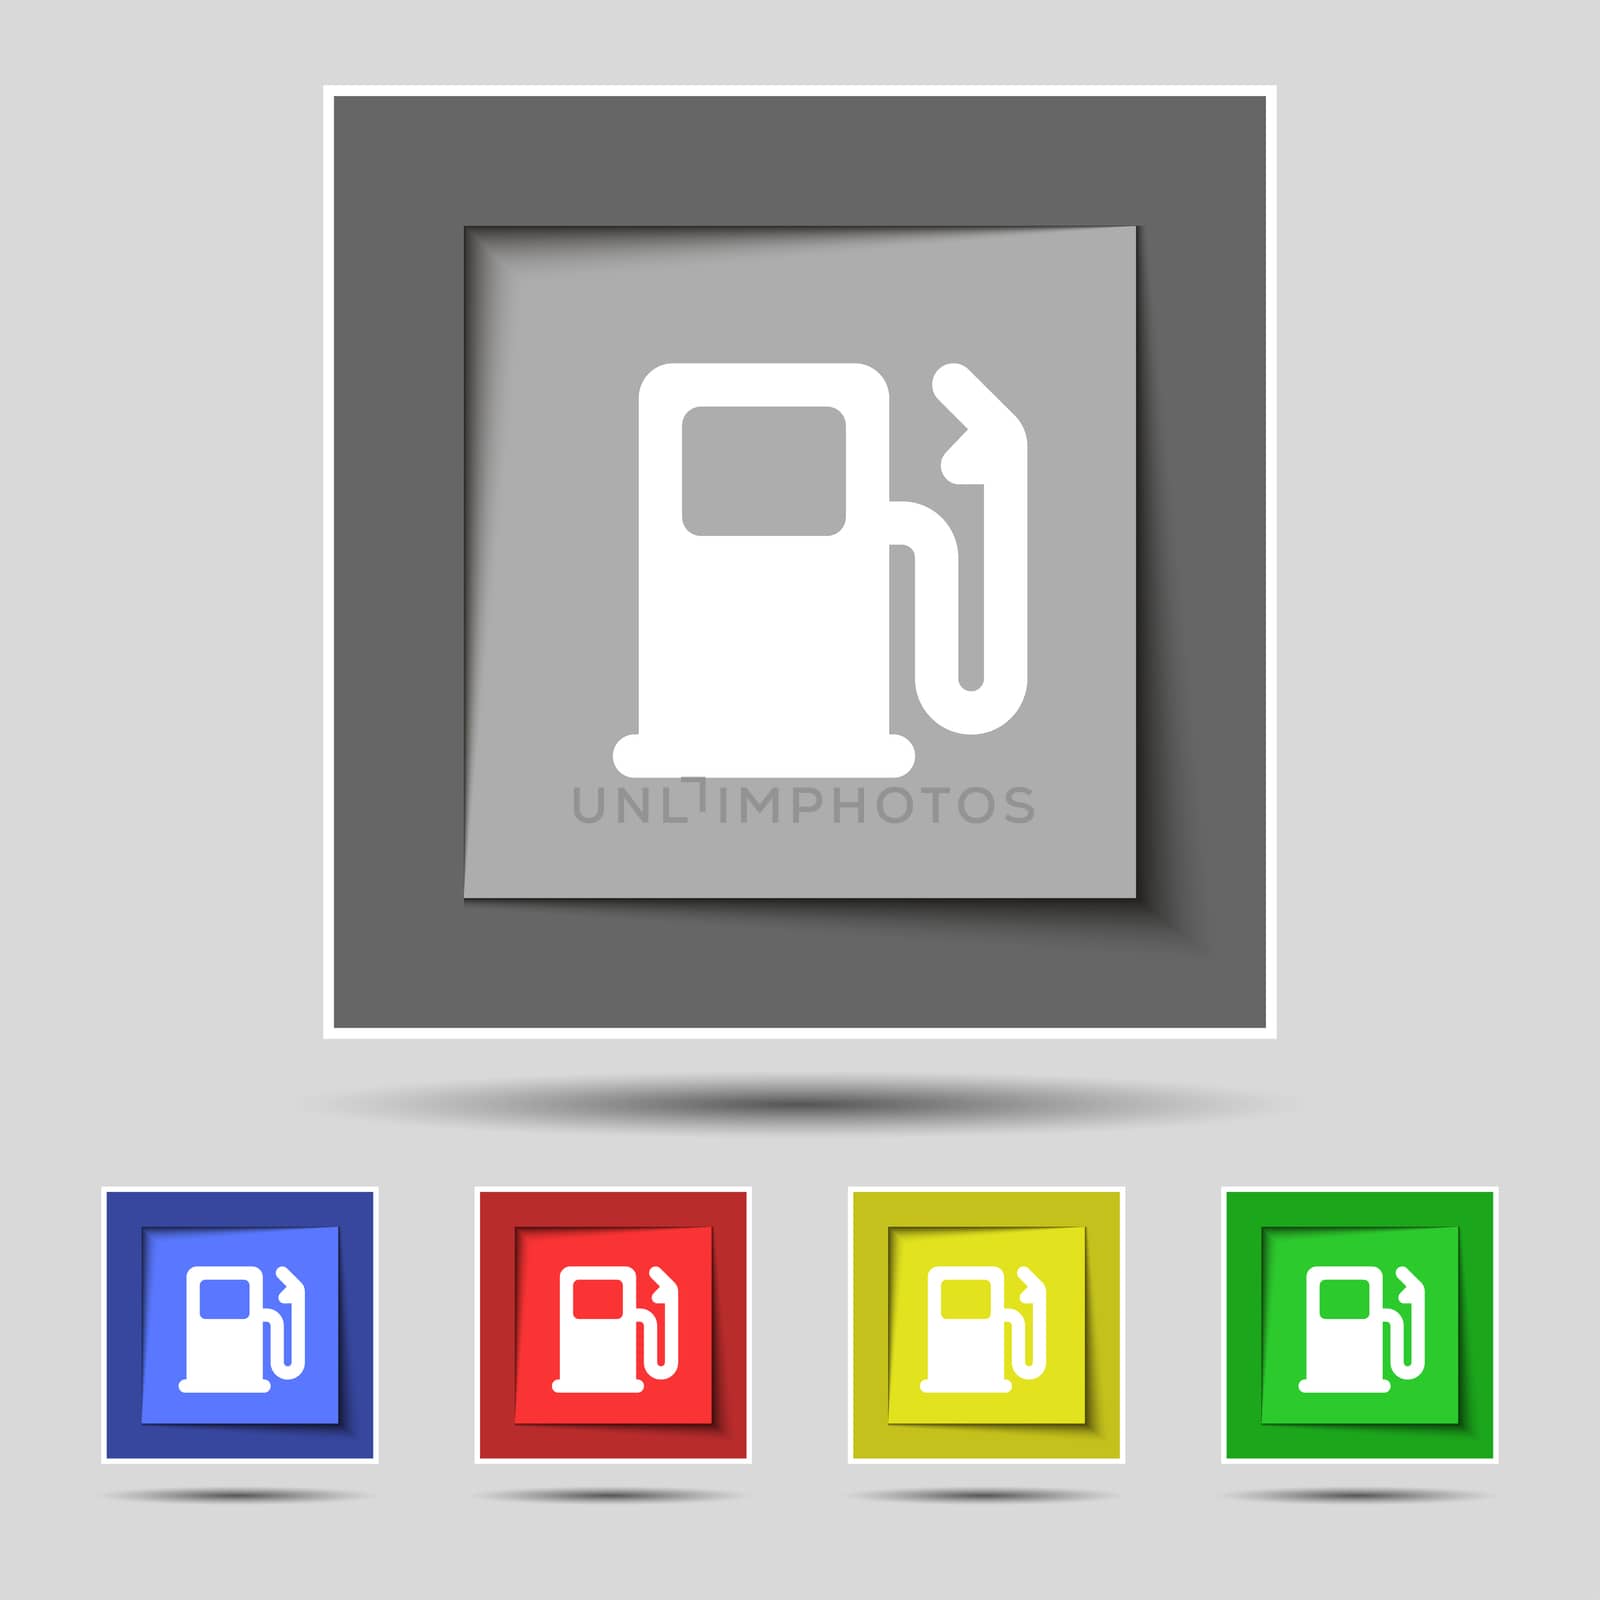 Petrol or Gas station, Car fuel icon sign on the original five colored buttons. illustration